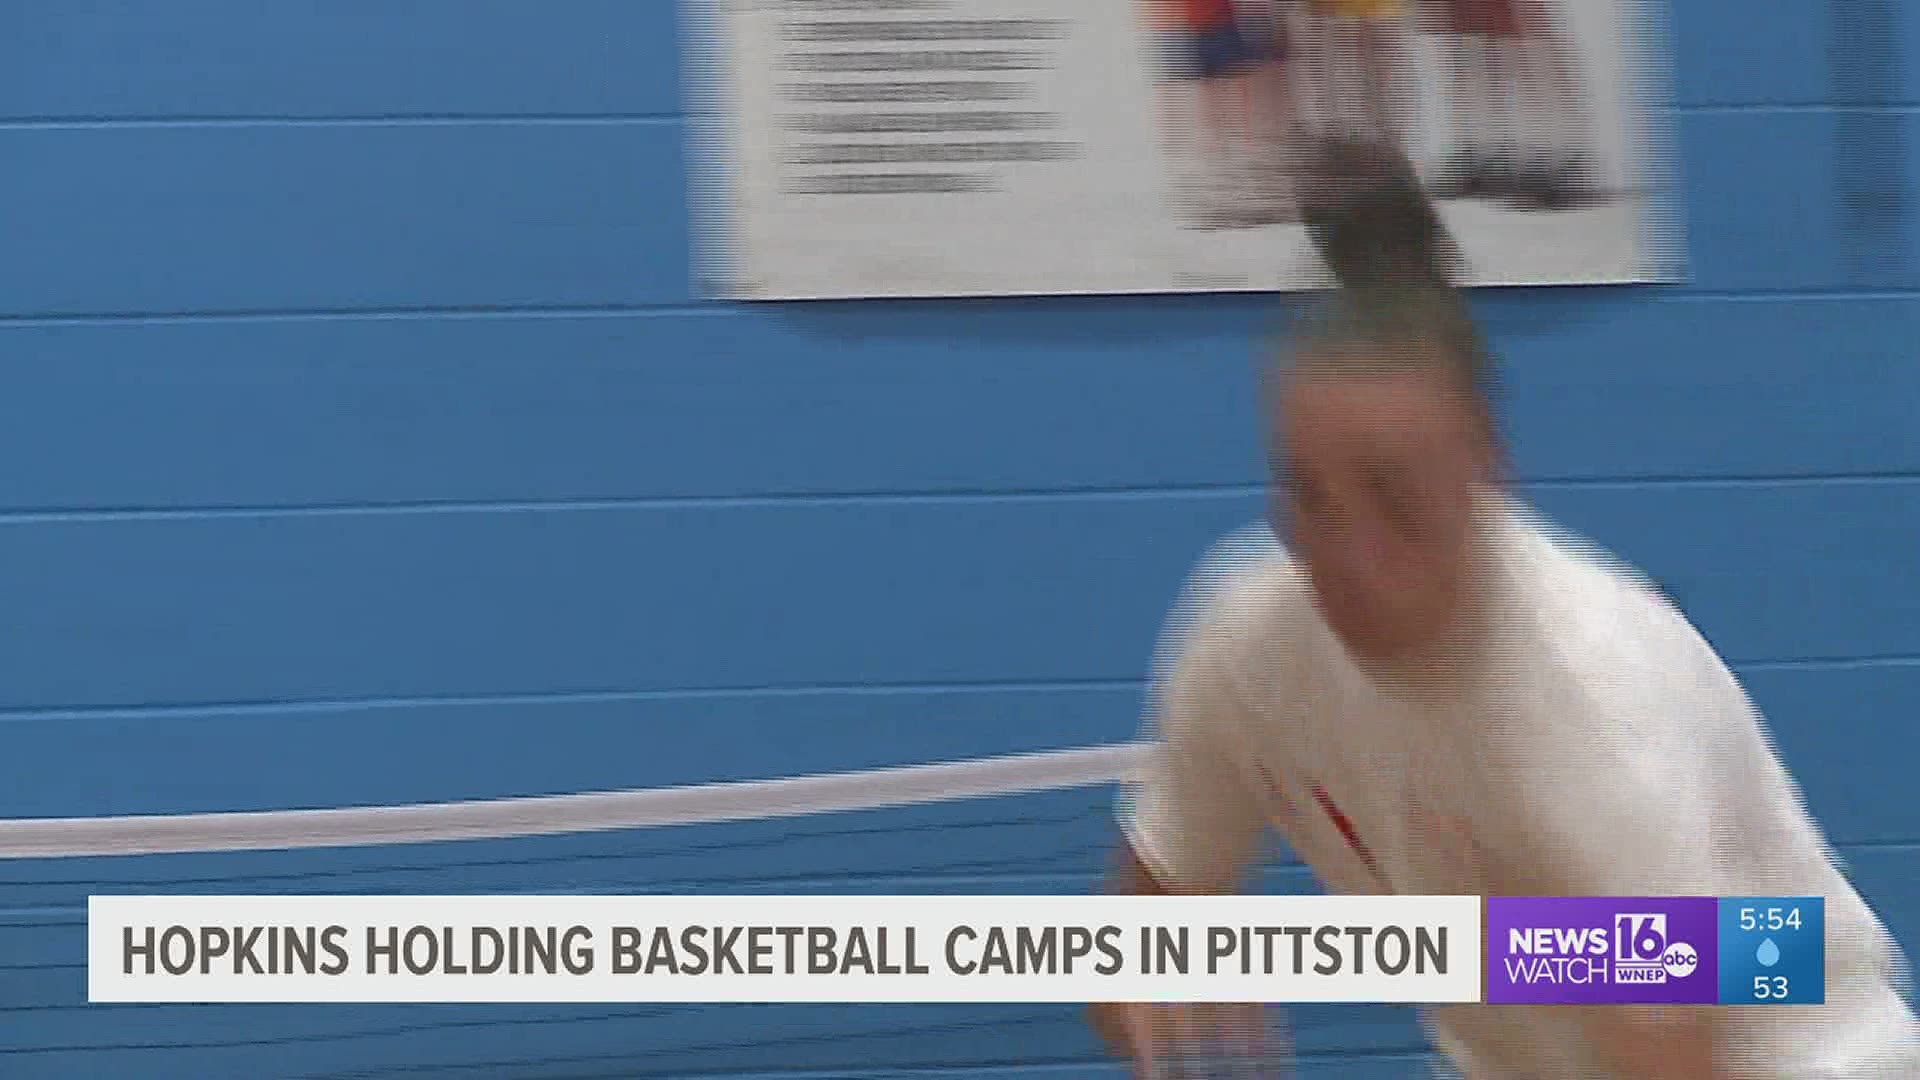 Former Pittston Area basketball star Mia Hopkins is hosting basketball camps back home before resuming her professional hoops career.